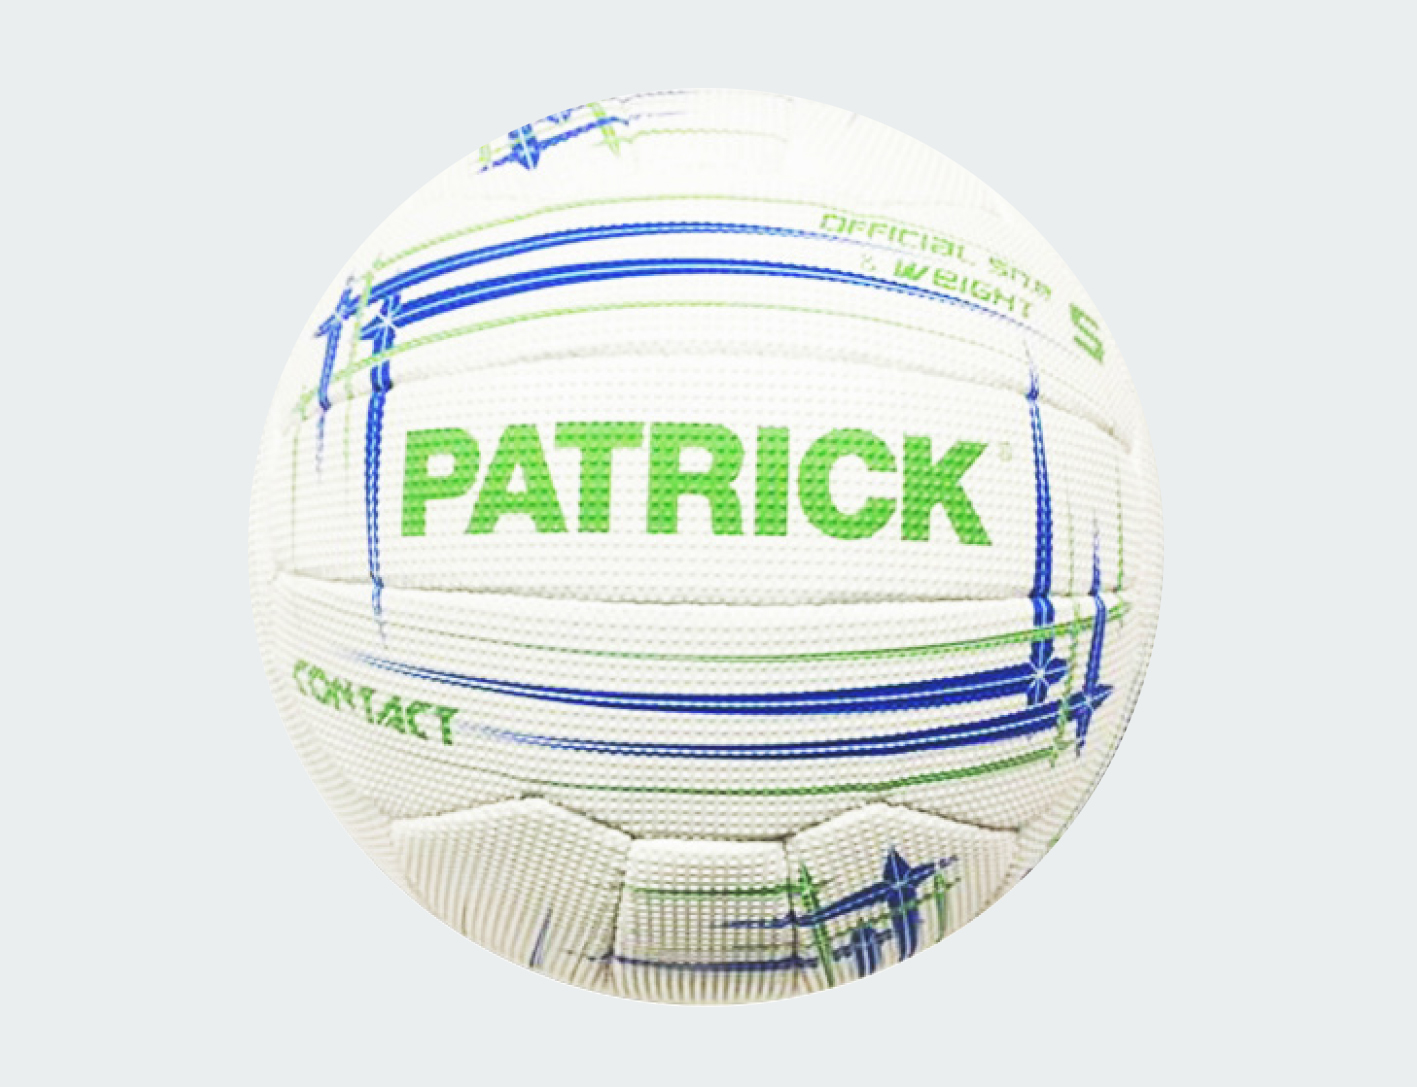 Netball Patrick Team Contact Size 5